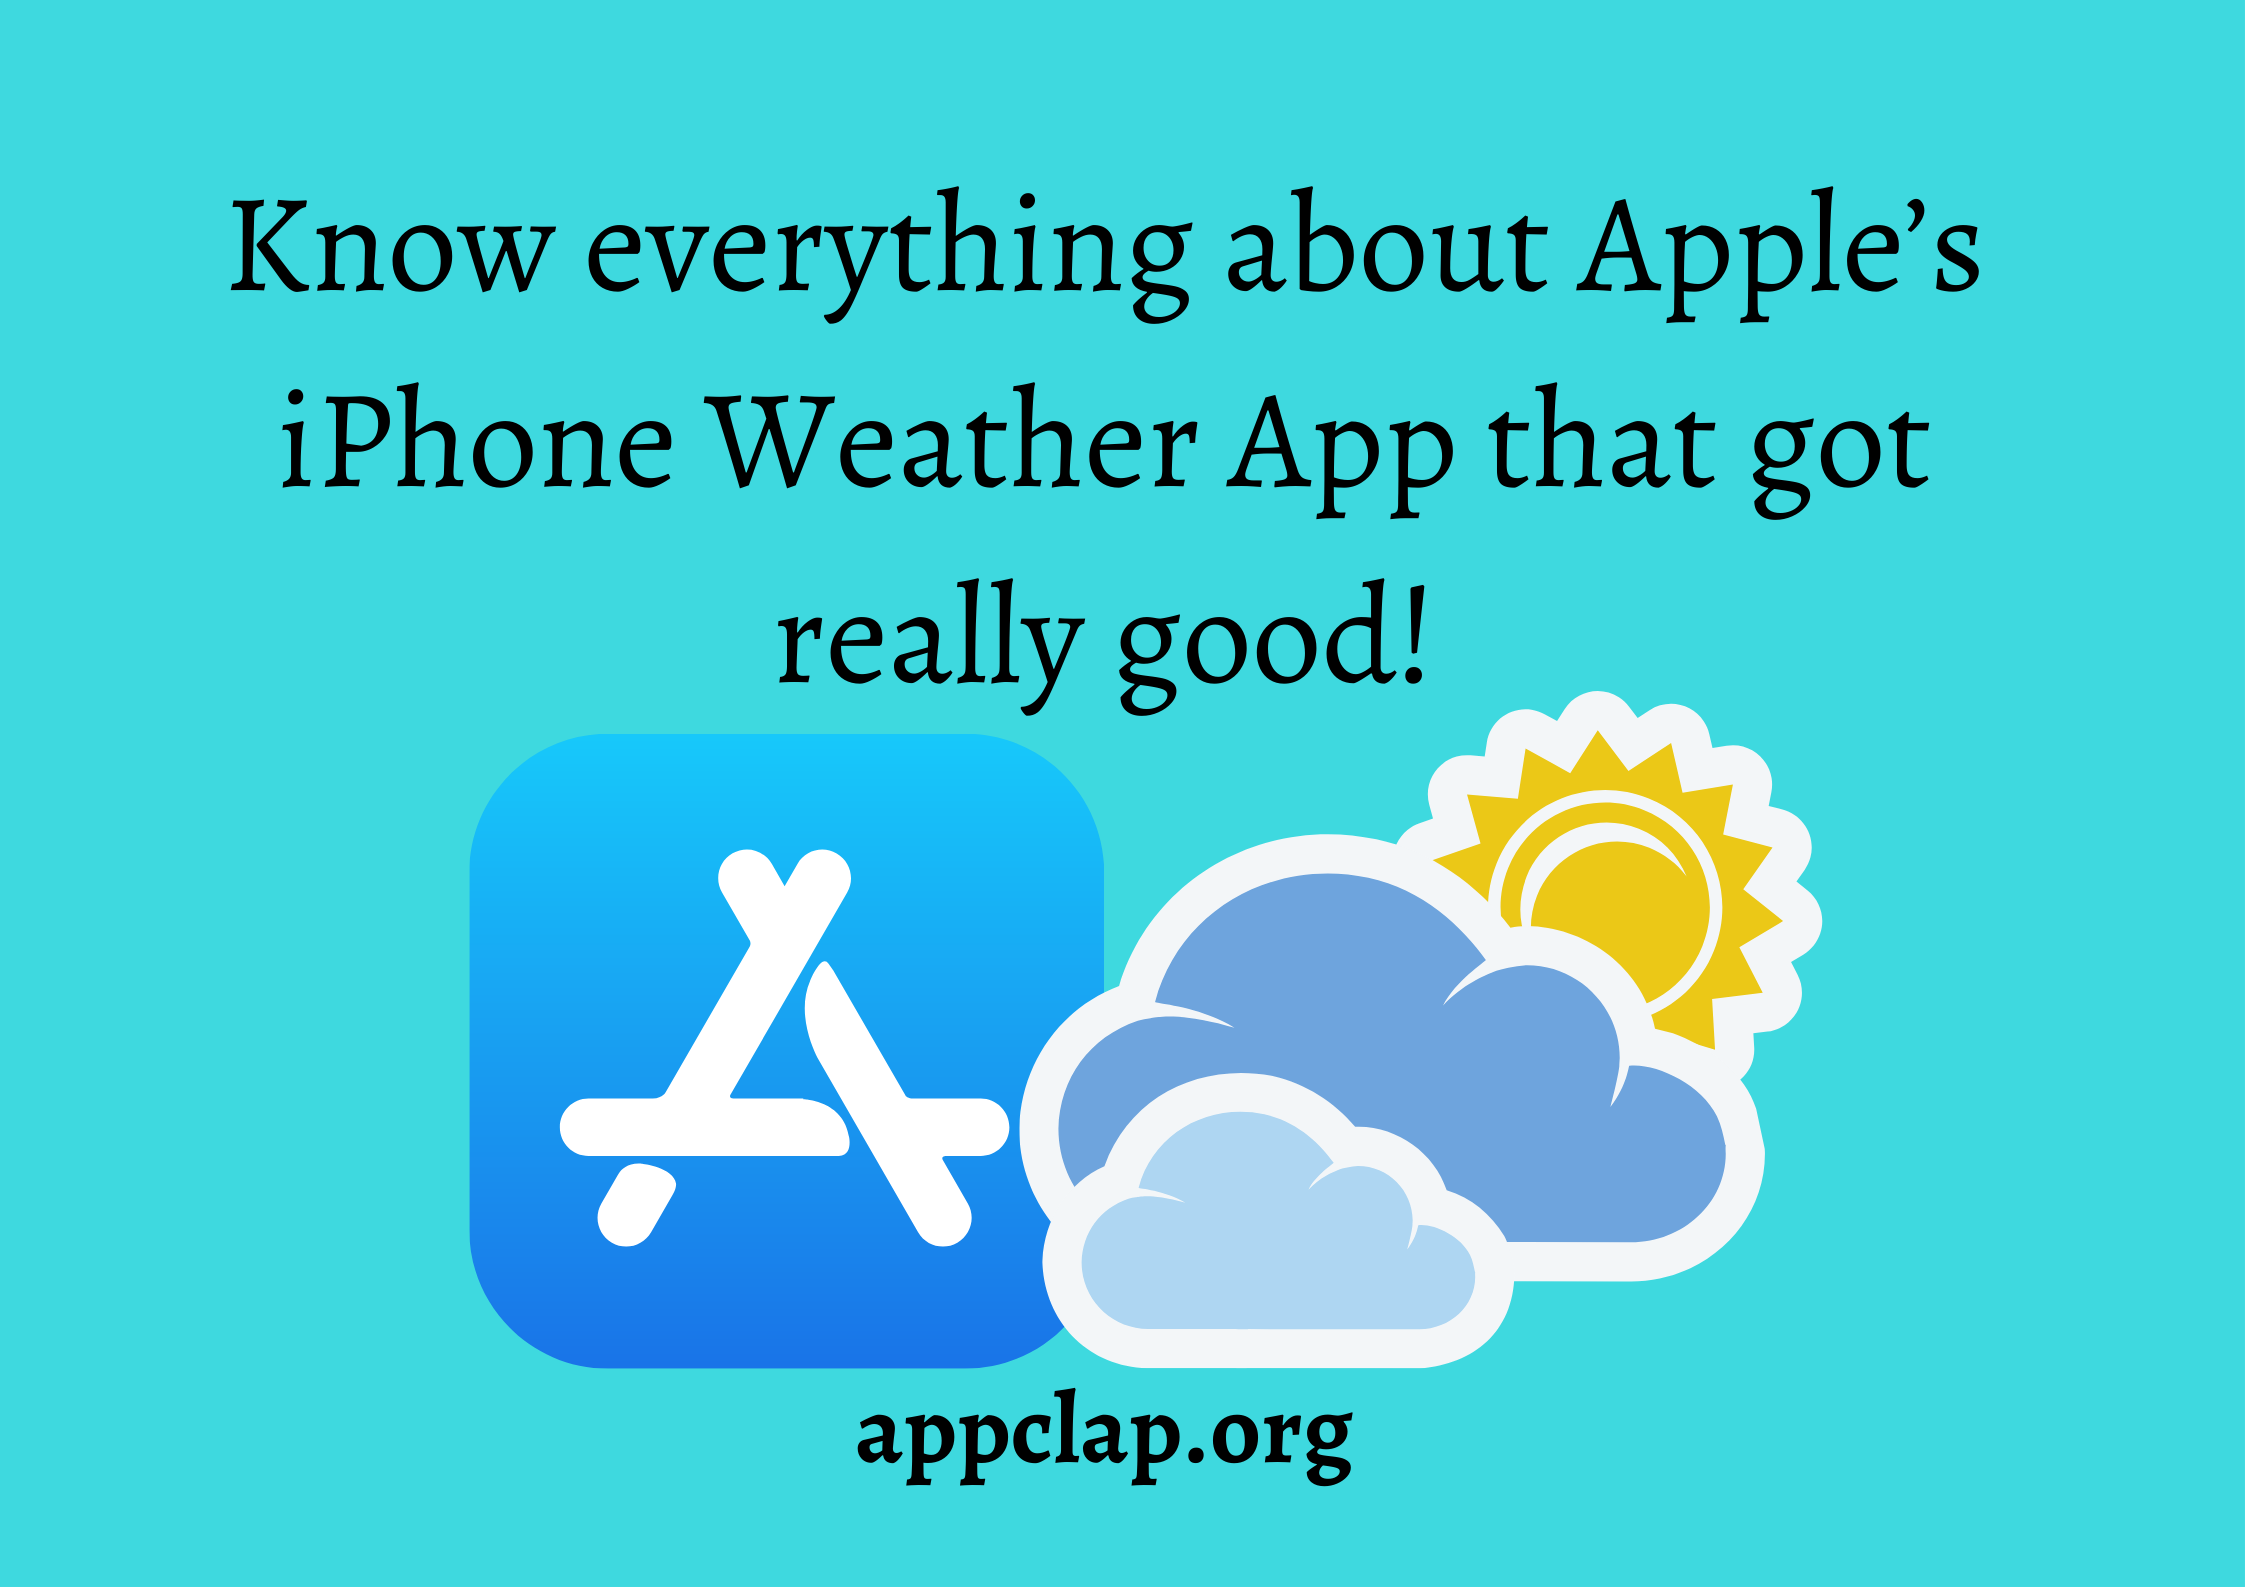 Know everything about Apple’s iPhone Weather App that got really good!